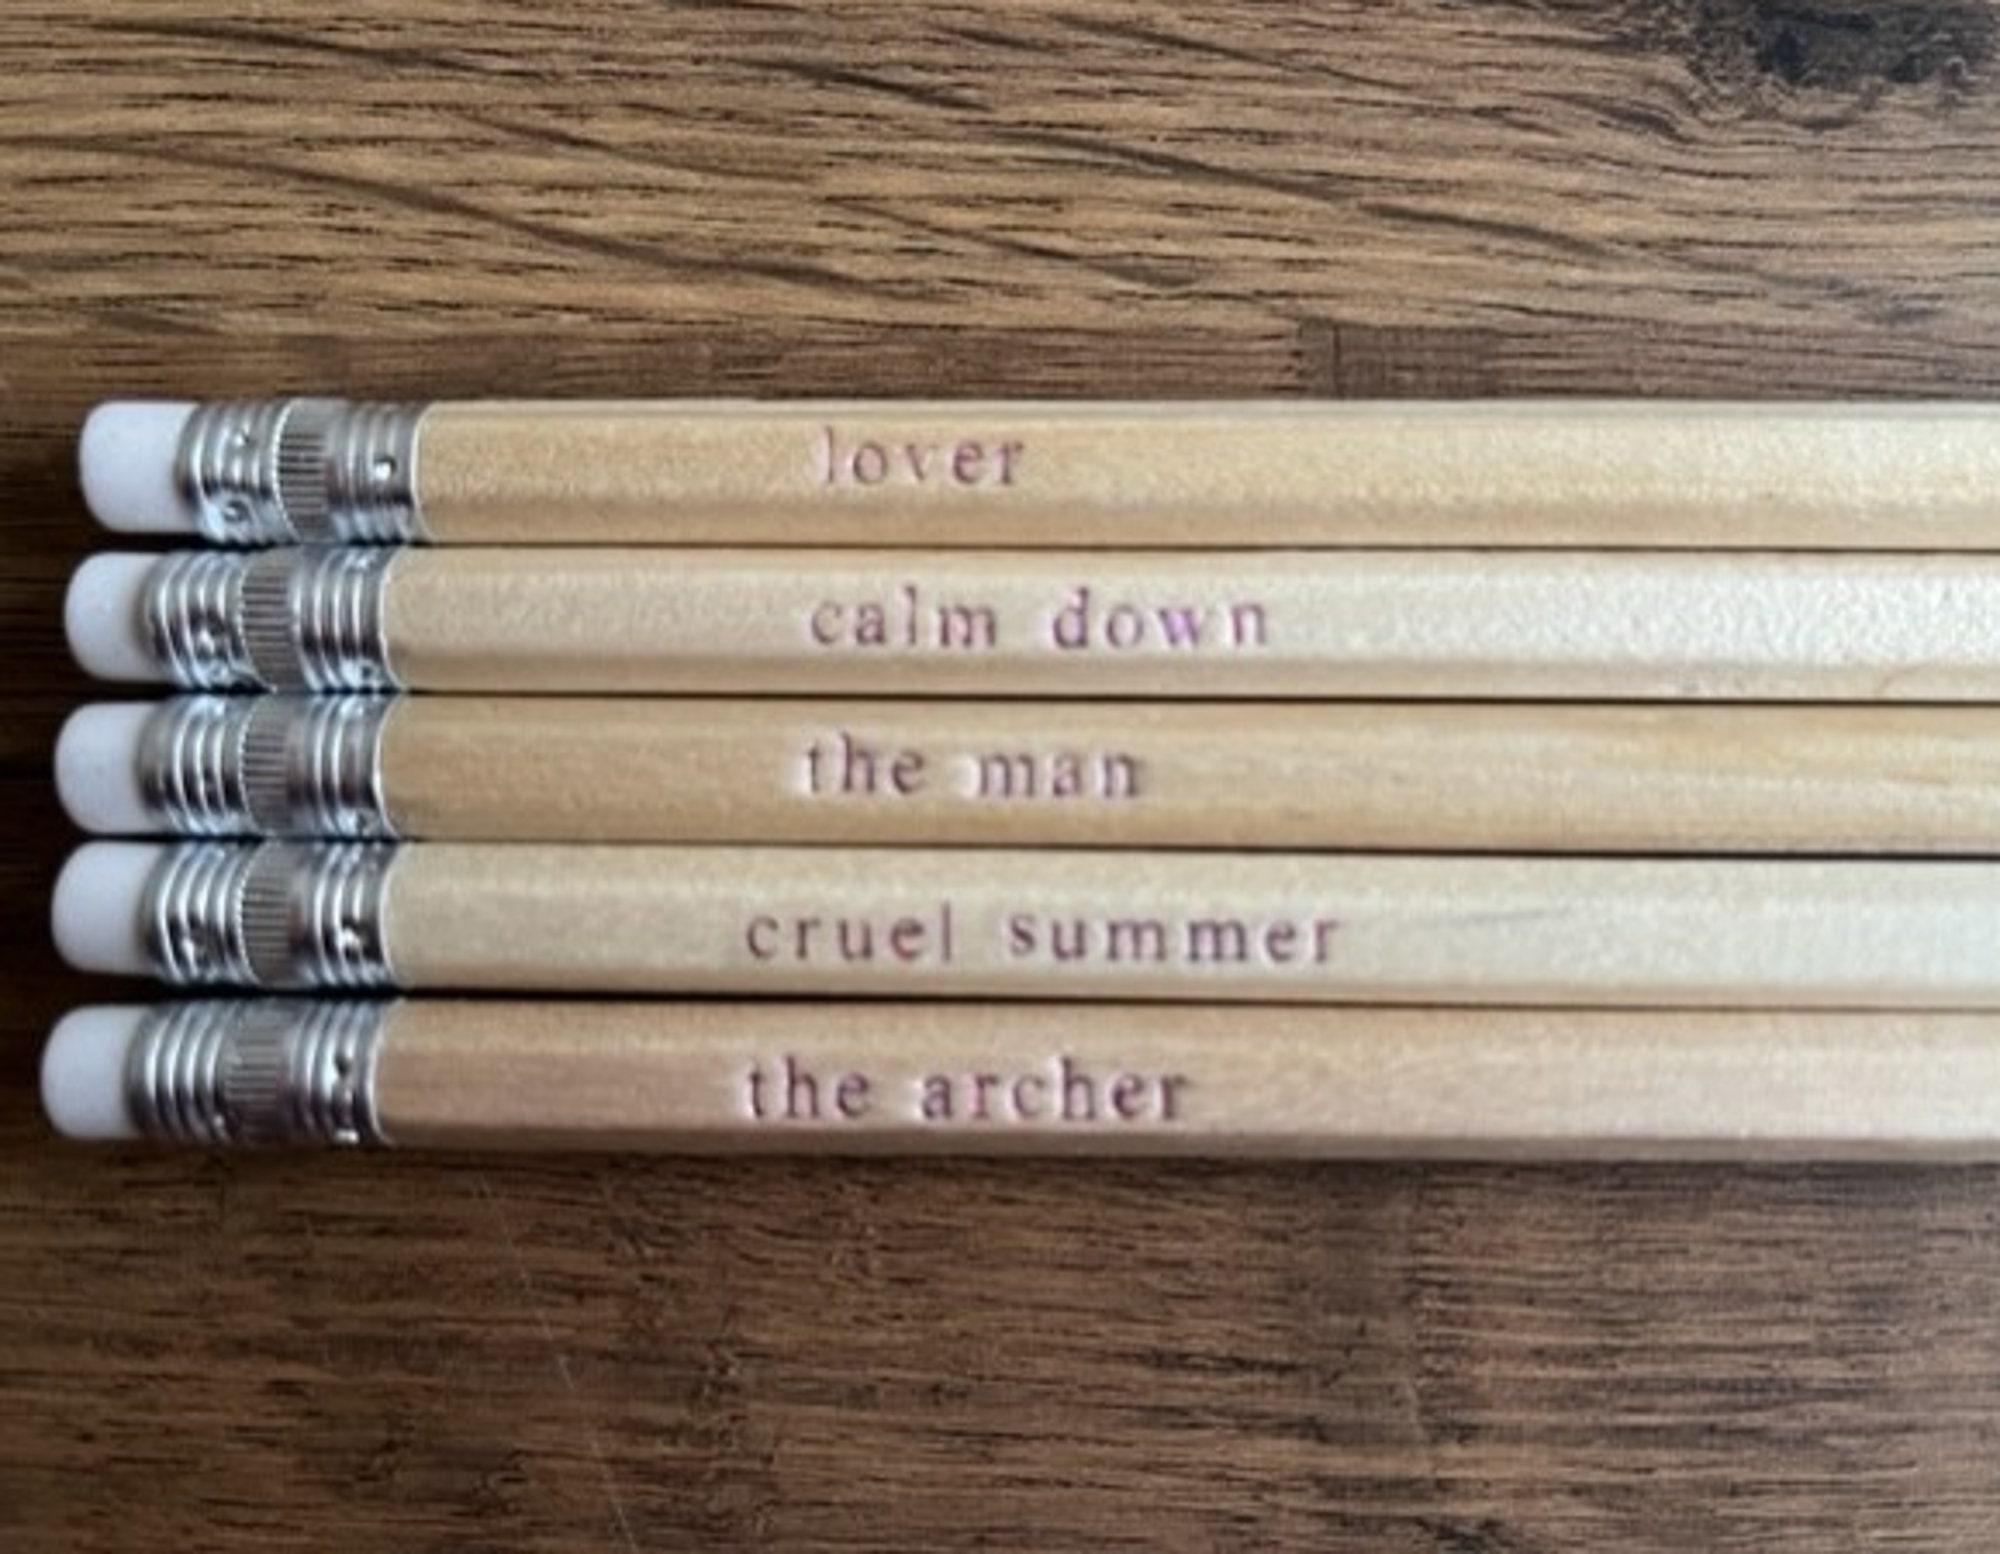 Taylor Swift Pencils Customised Pencils Featuring Lover Song Titles 